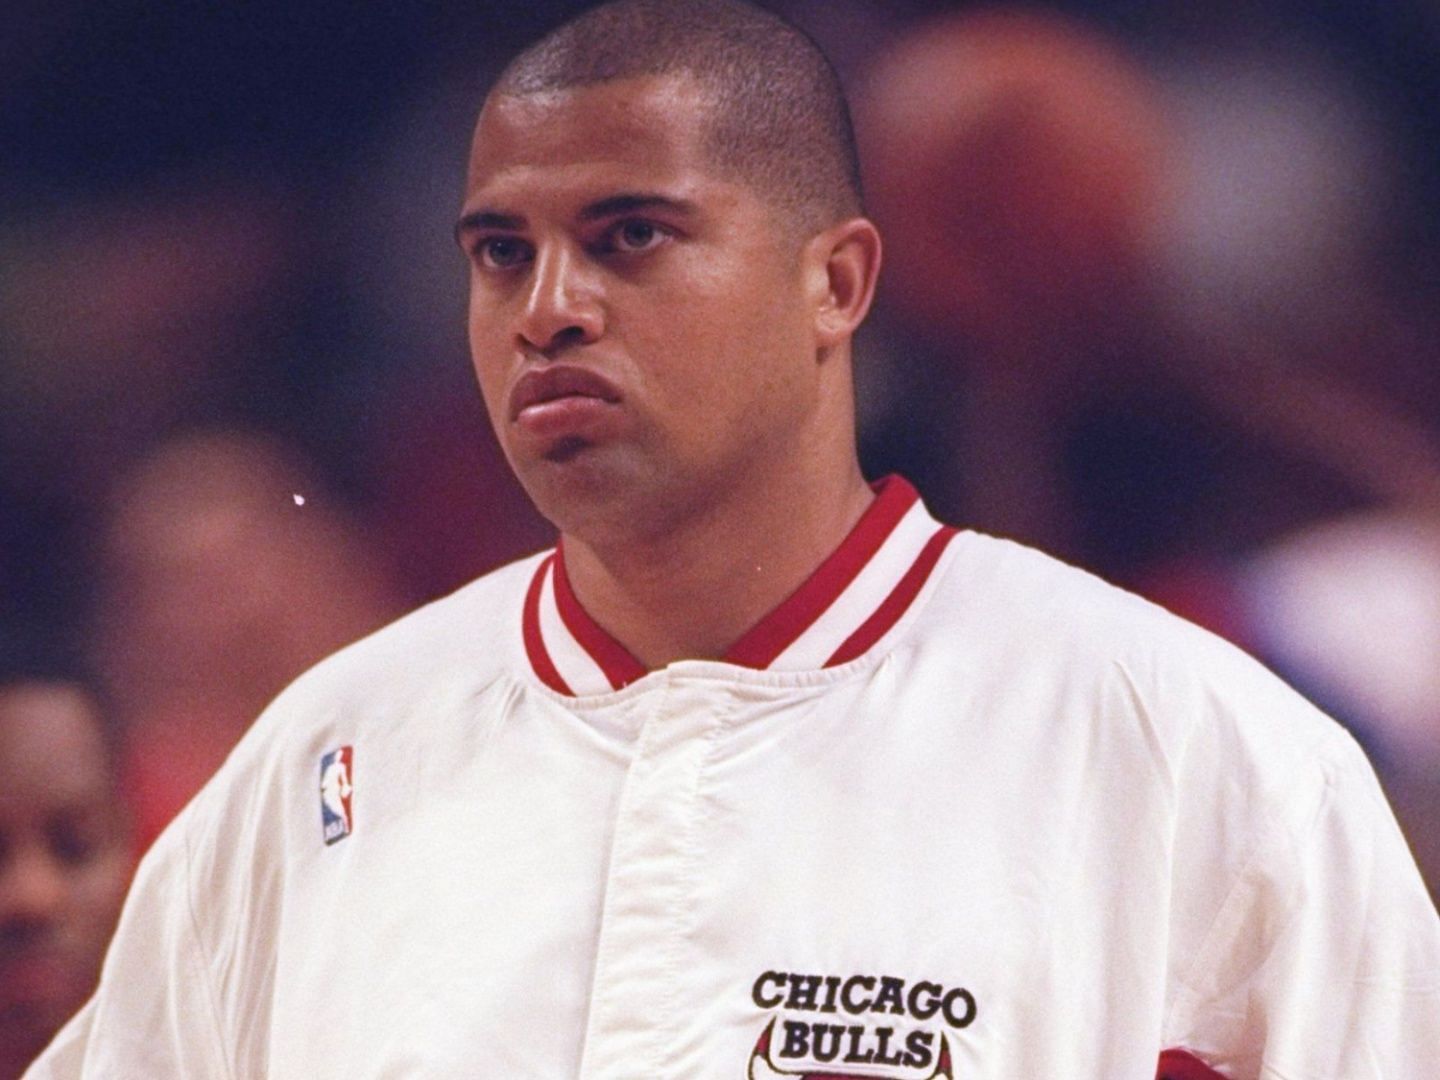 Bison Dele playing for the Chicago Bulls